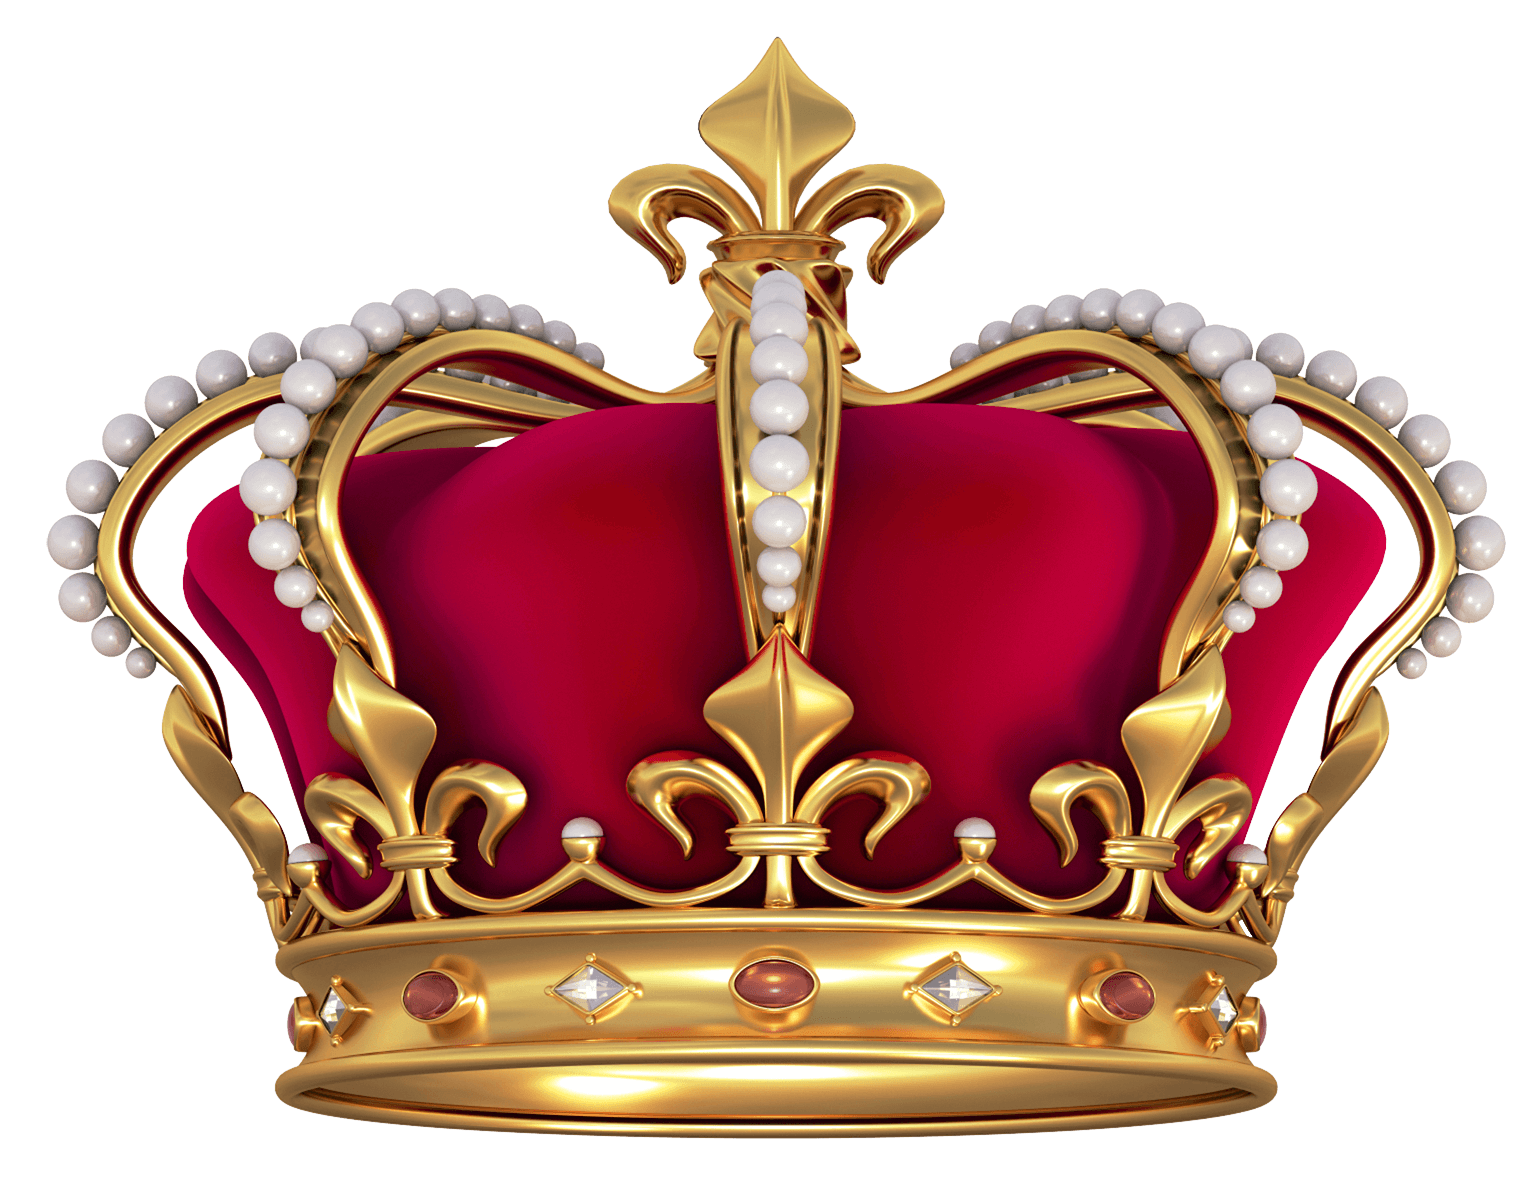 Red and Gold Crown Logo - Crown him with many crowns clip art royalty free stock - RR collections